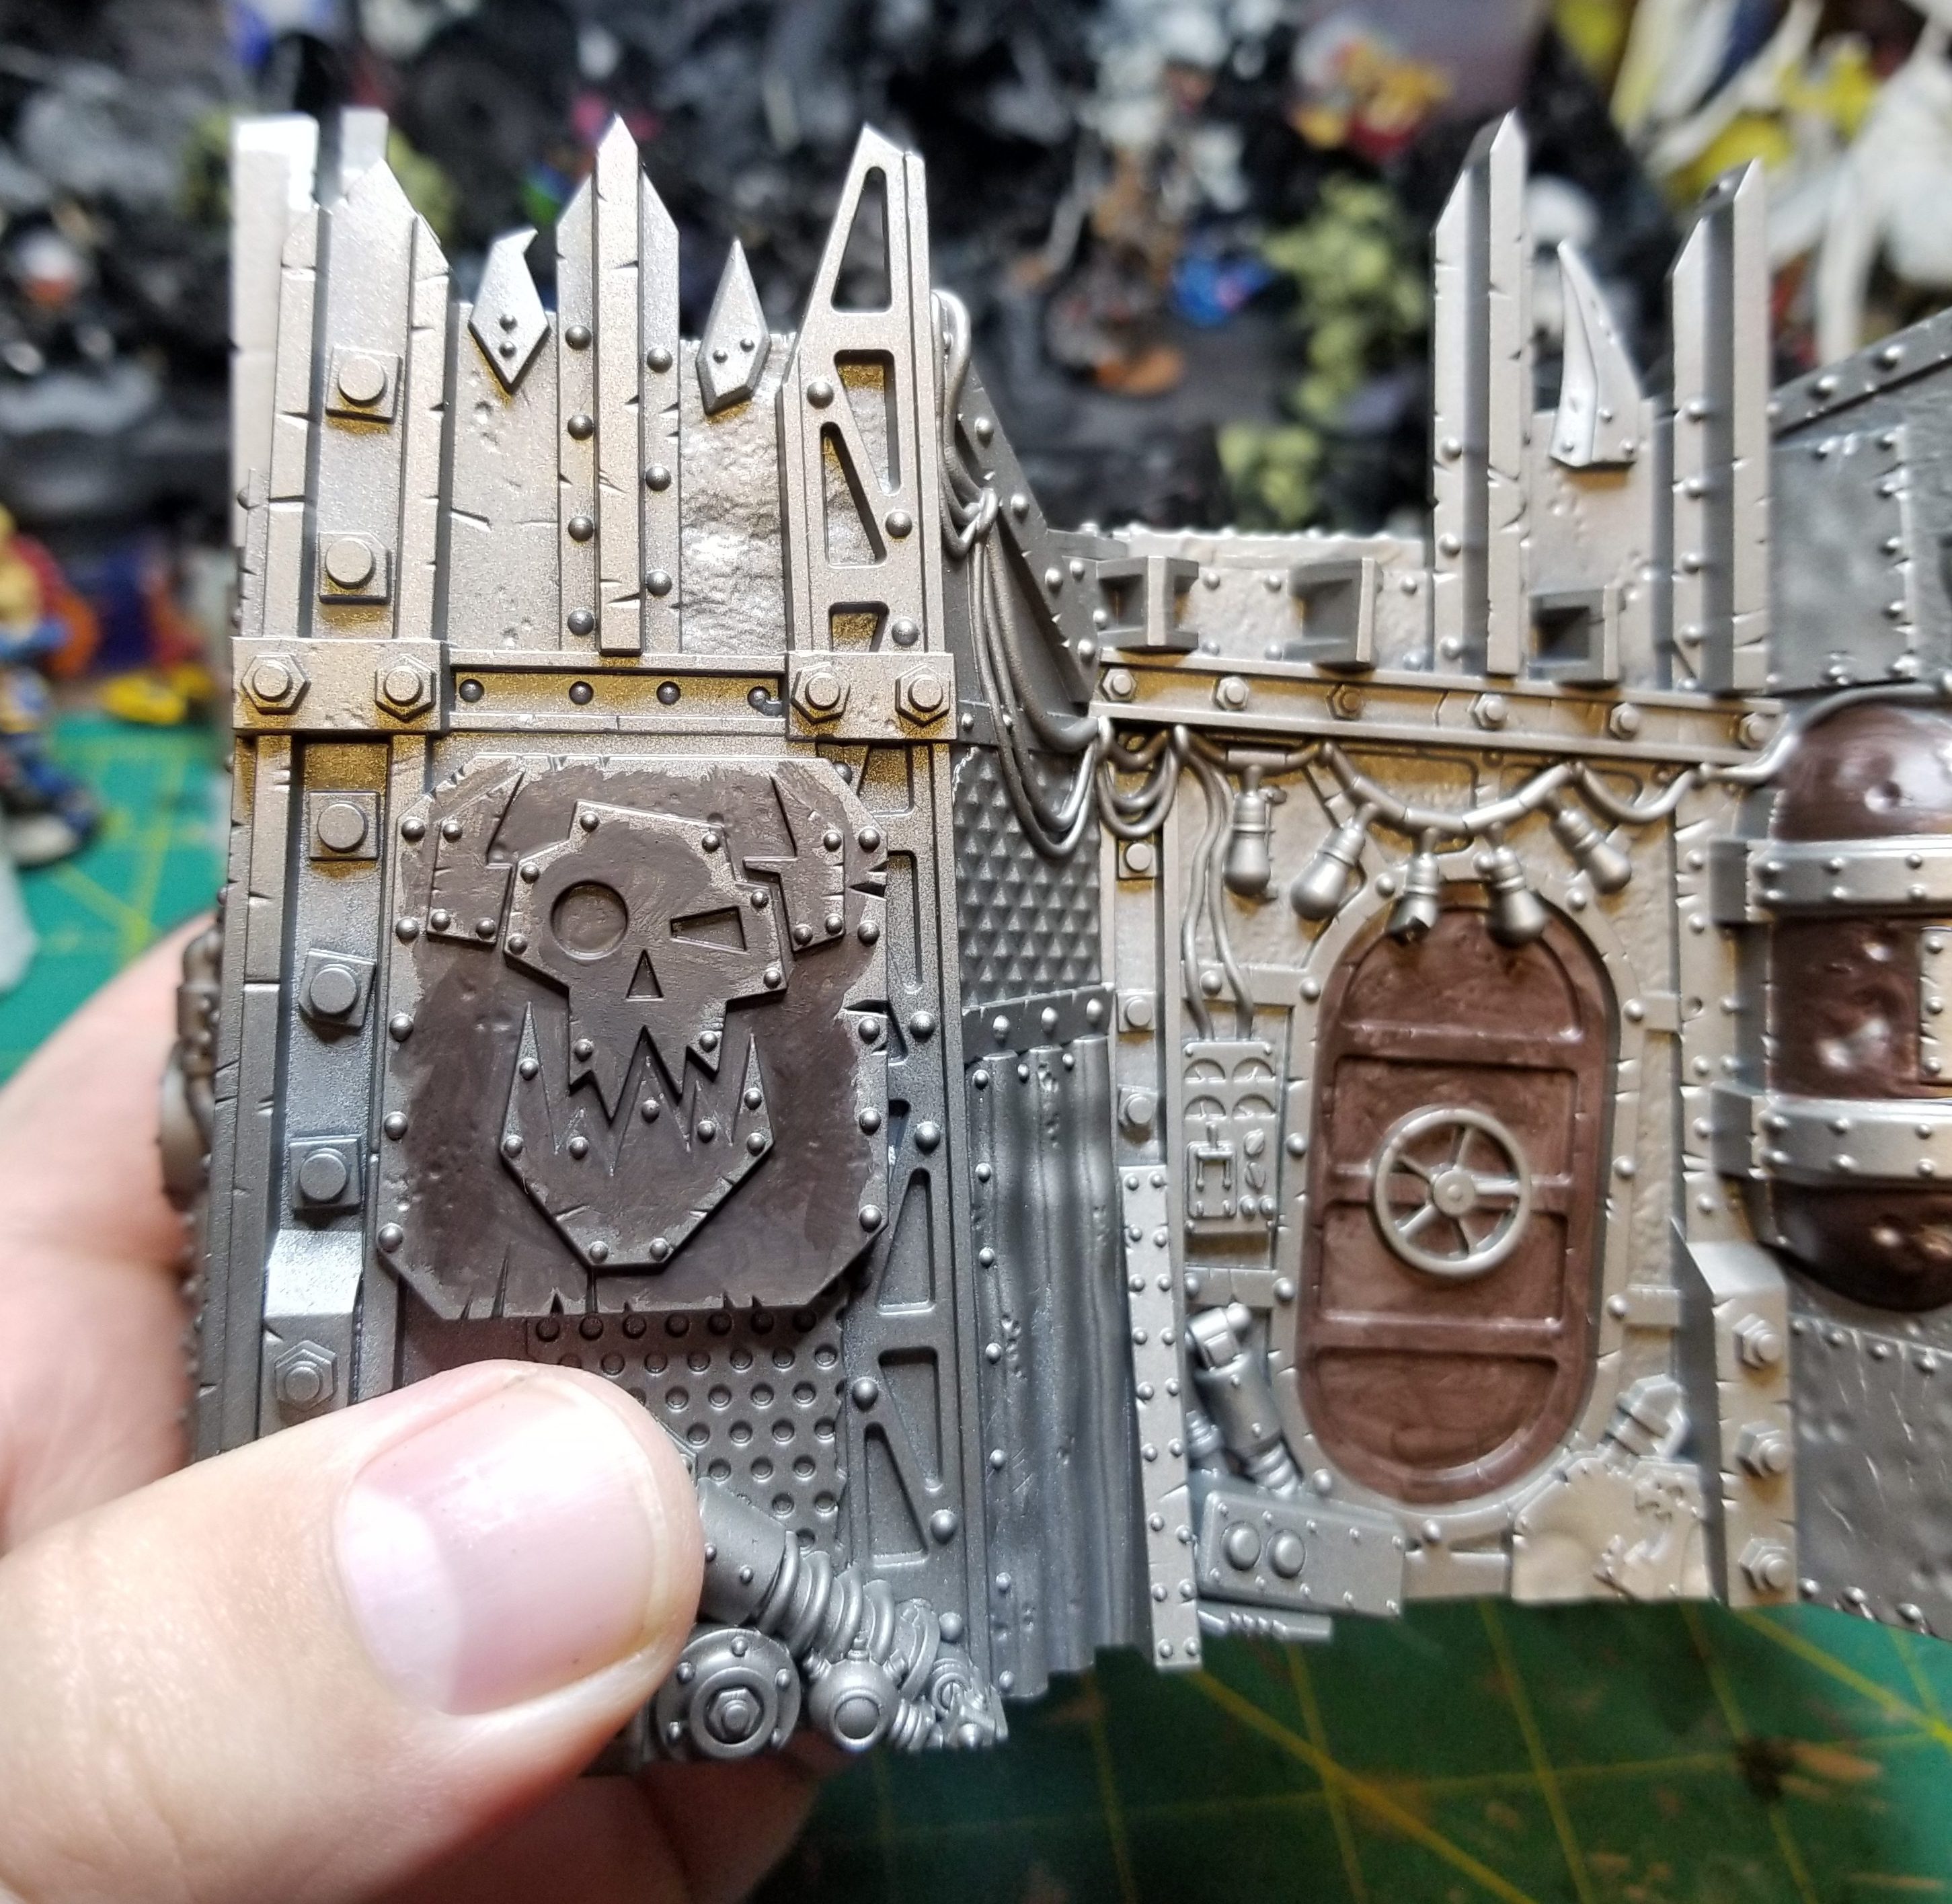 Easy rusty metal guide 1. Spray Leadbelcher 2. Shade with agrax